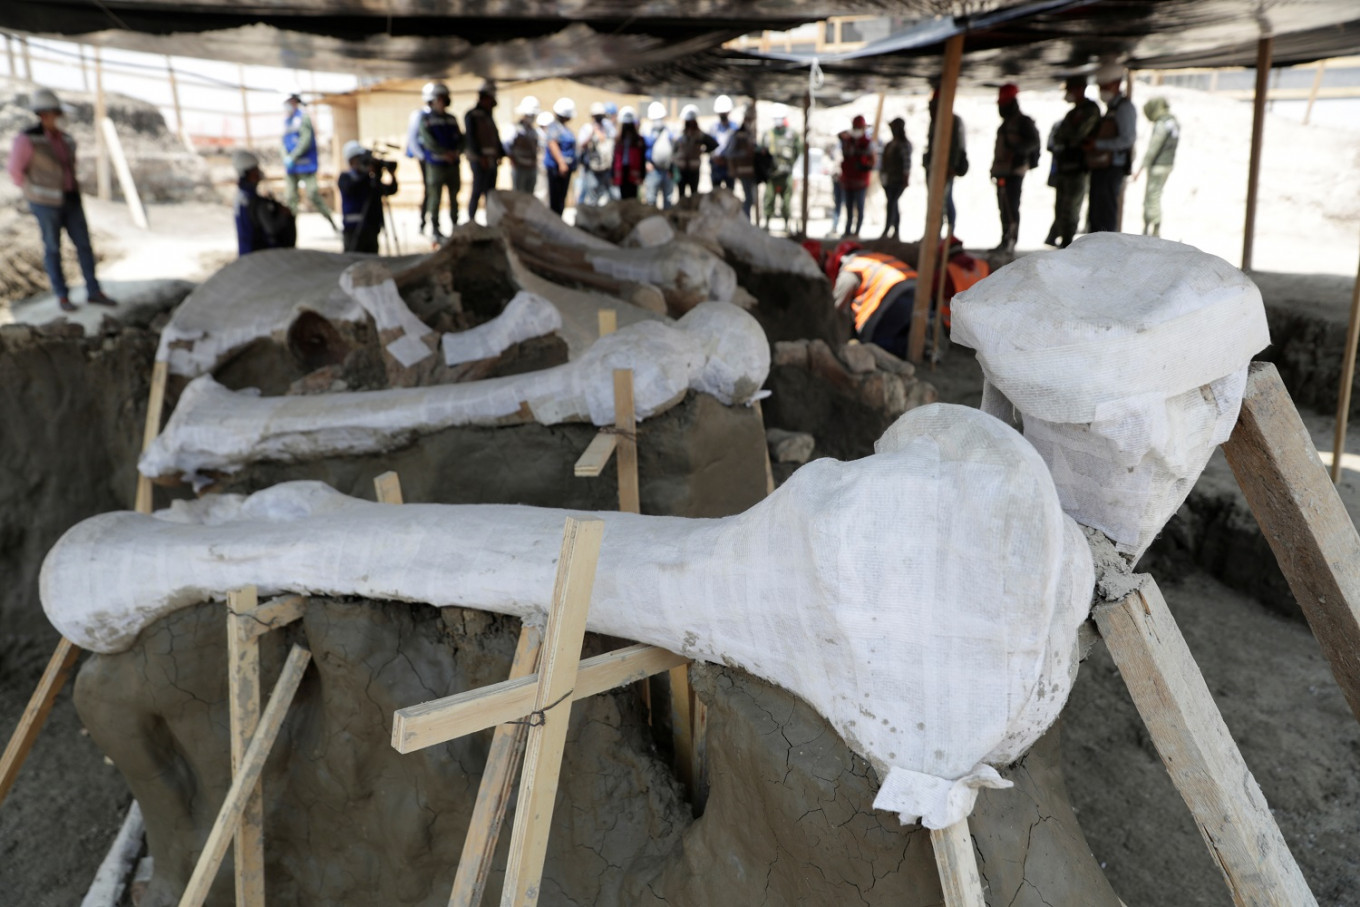 Mexican airport site emerges as major graveyard of Ice Age mammoths - Environment - The Jakarta Post